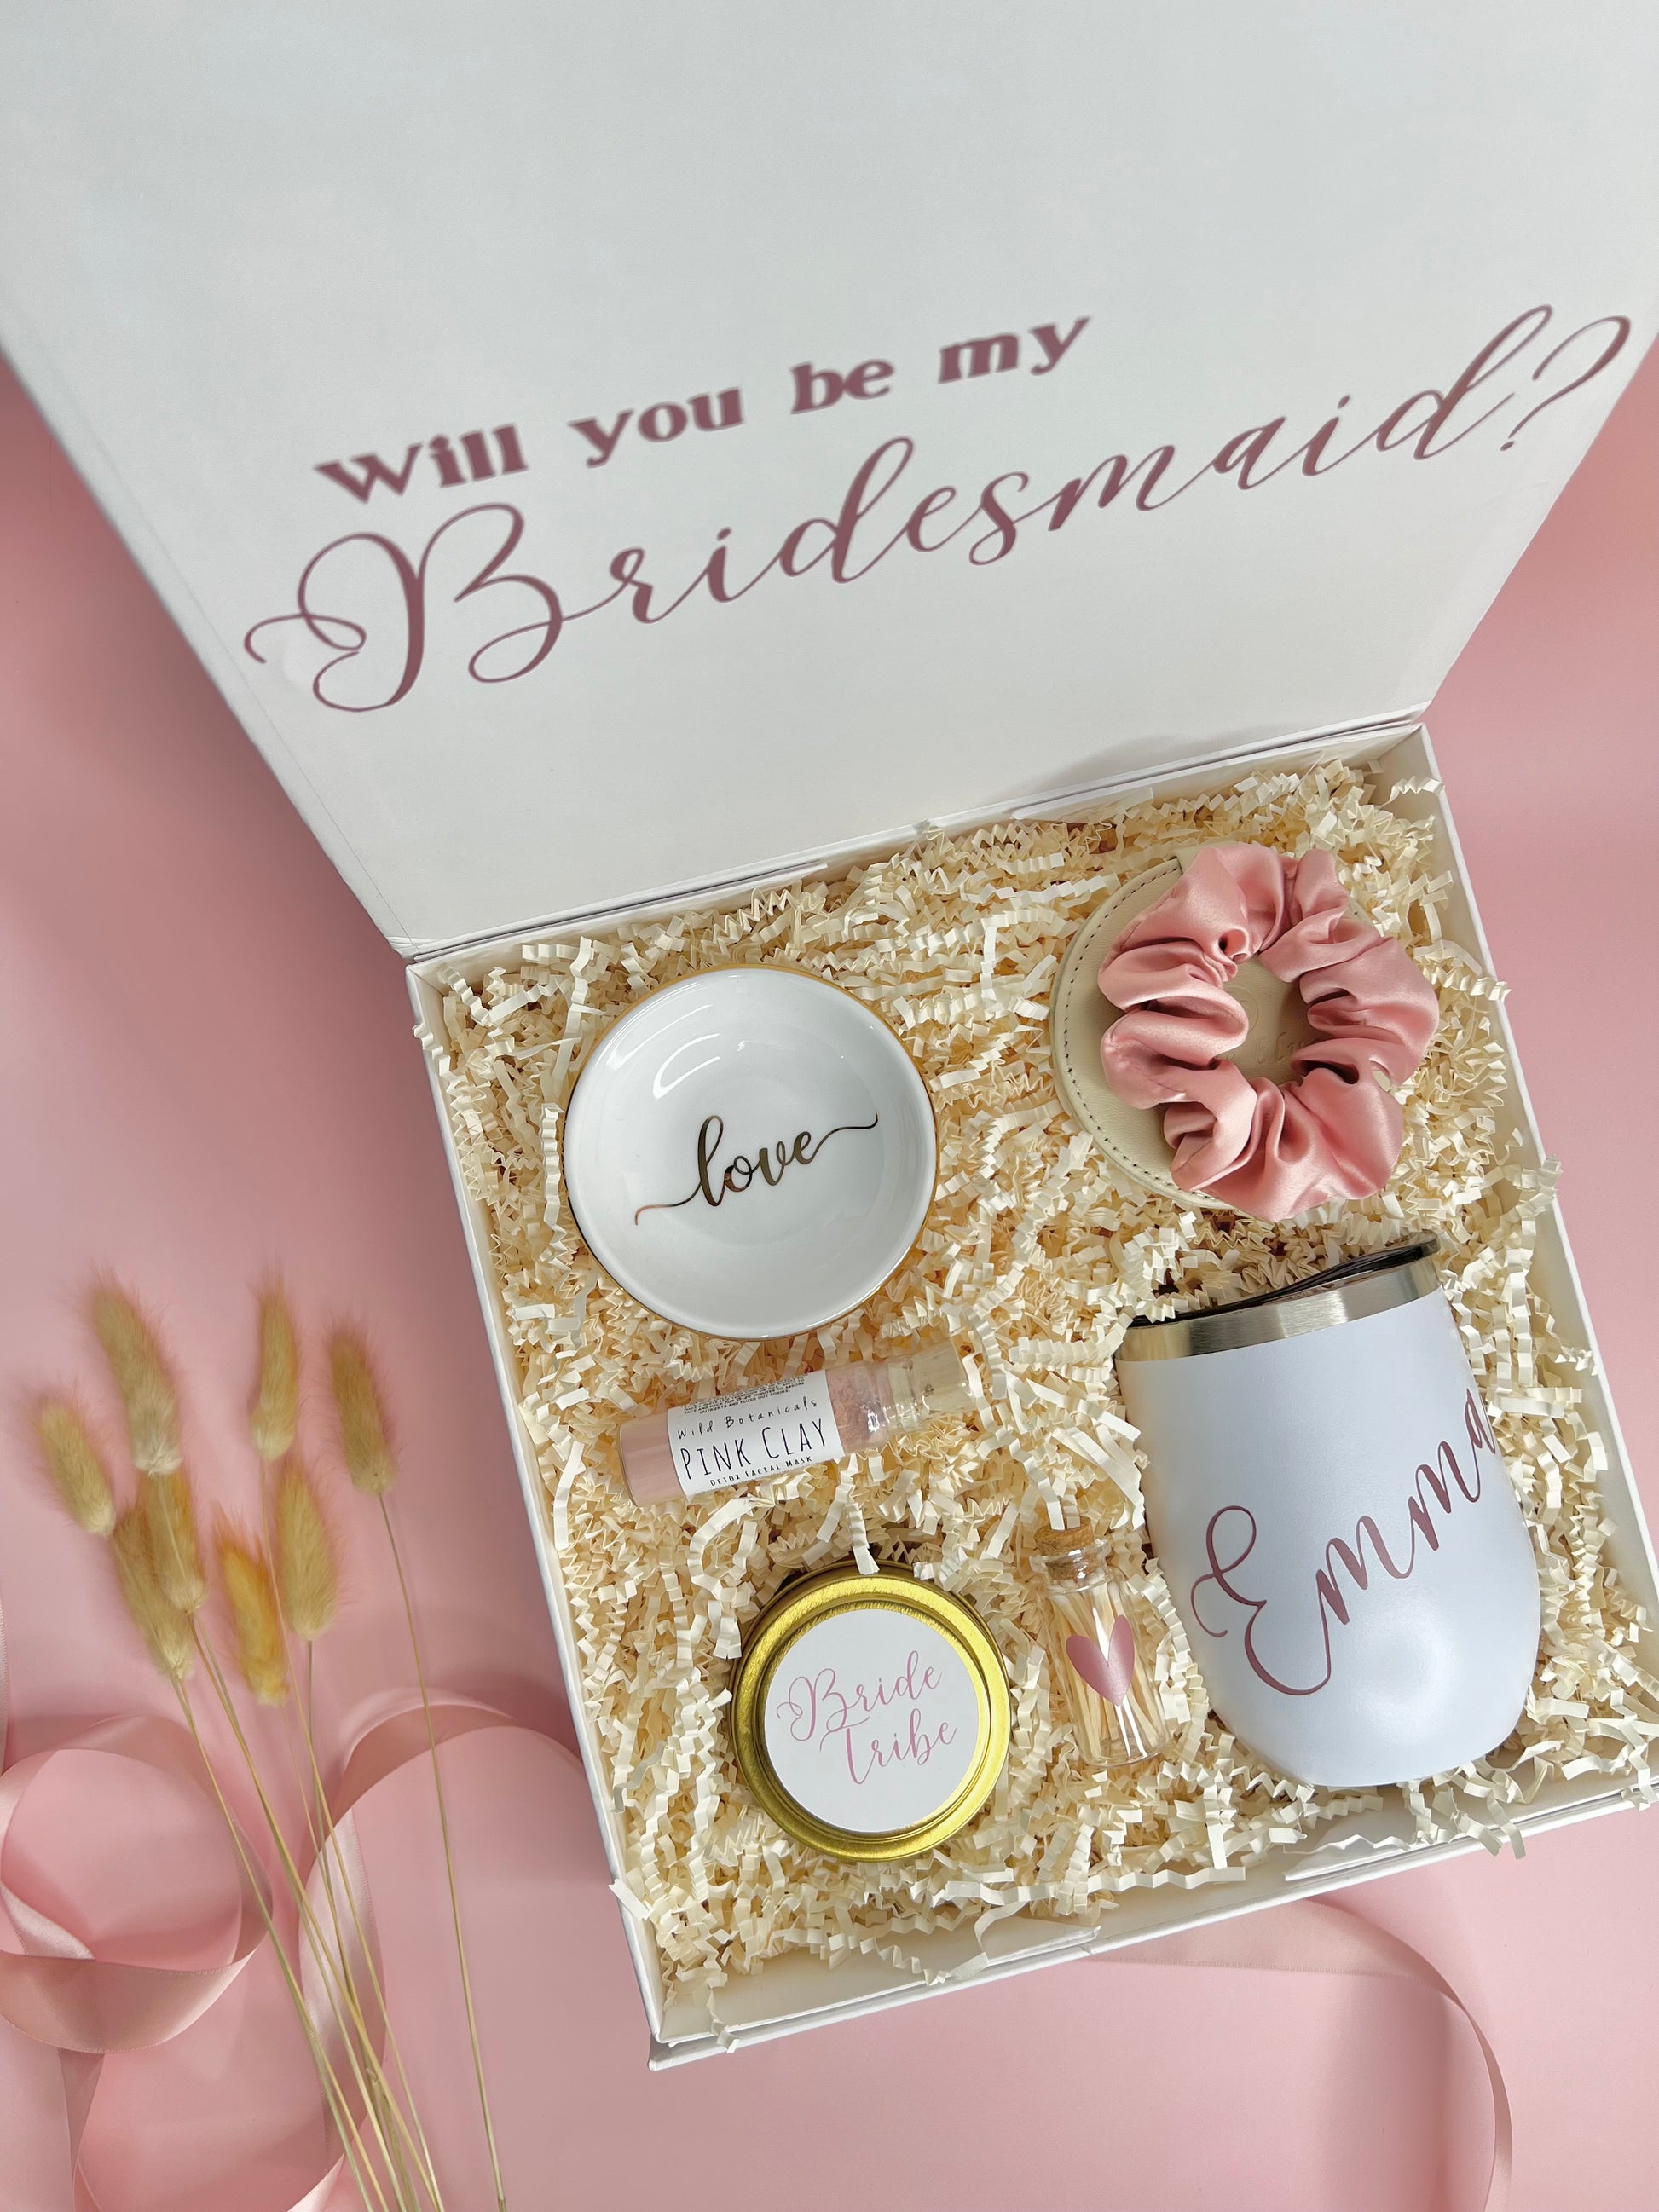 Personalized Bridesmaid Proposal box filled with rose, gold and white products. Contains travel size candle with custom sticker, satin scrunchie, pink clay face mask, compact mirror, ring dish, personalized 12oz tumbler, match jar with striker.